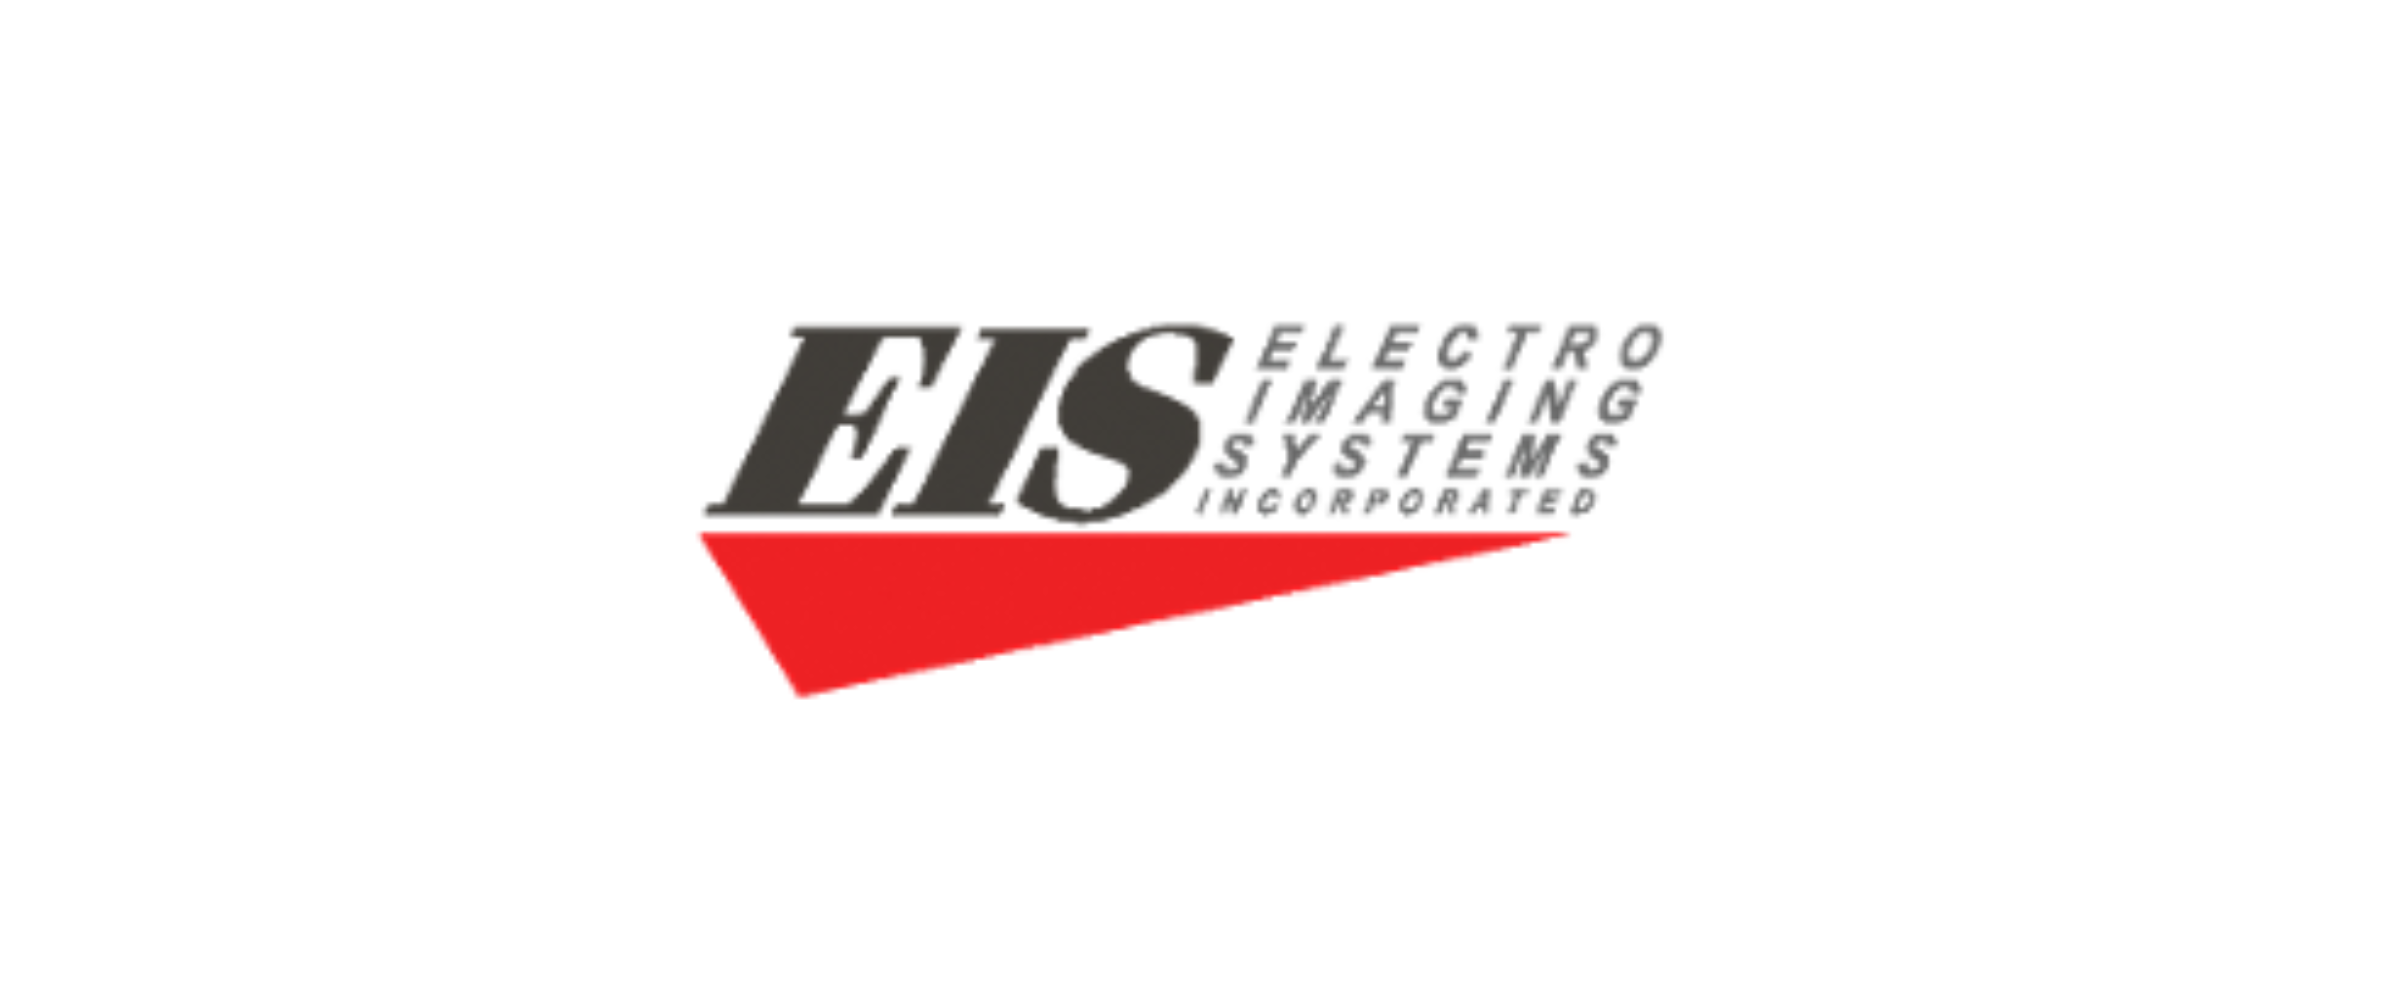 Toshiba America Business Solutions Acquires Electro Imaging Systems, Inc. Logo